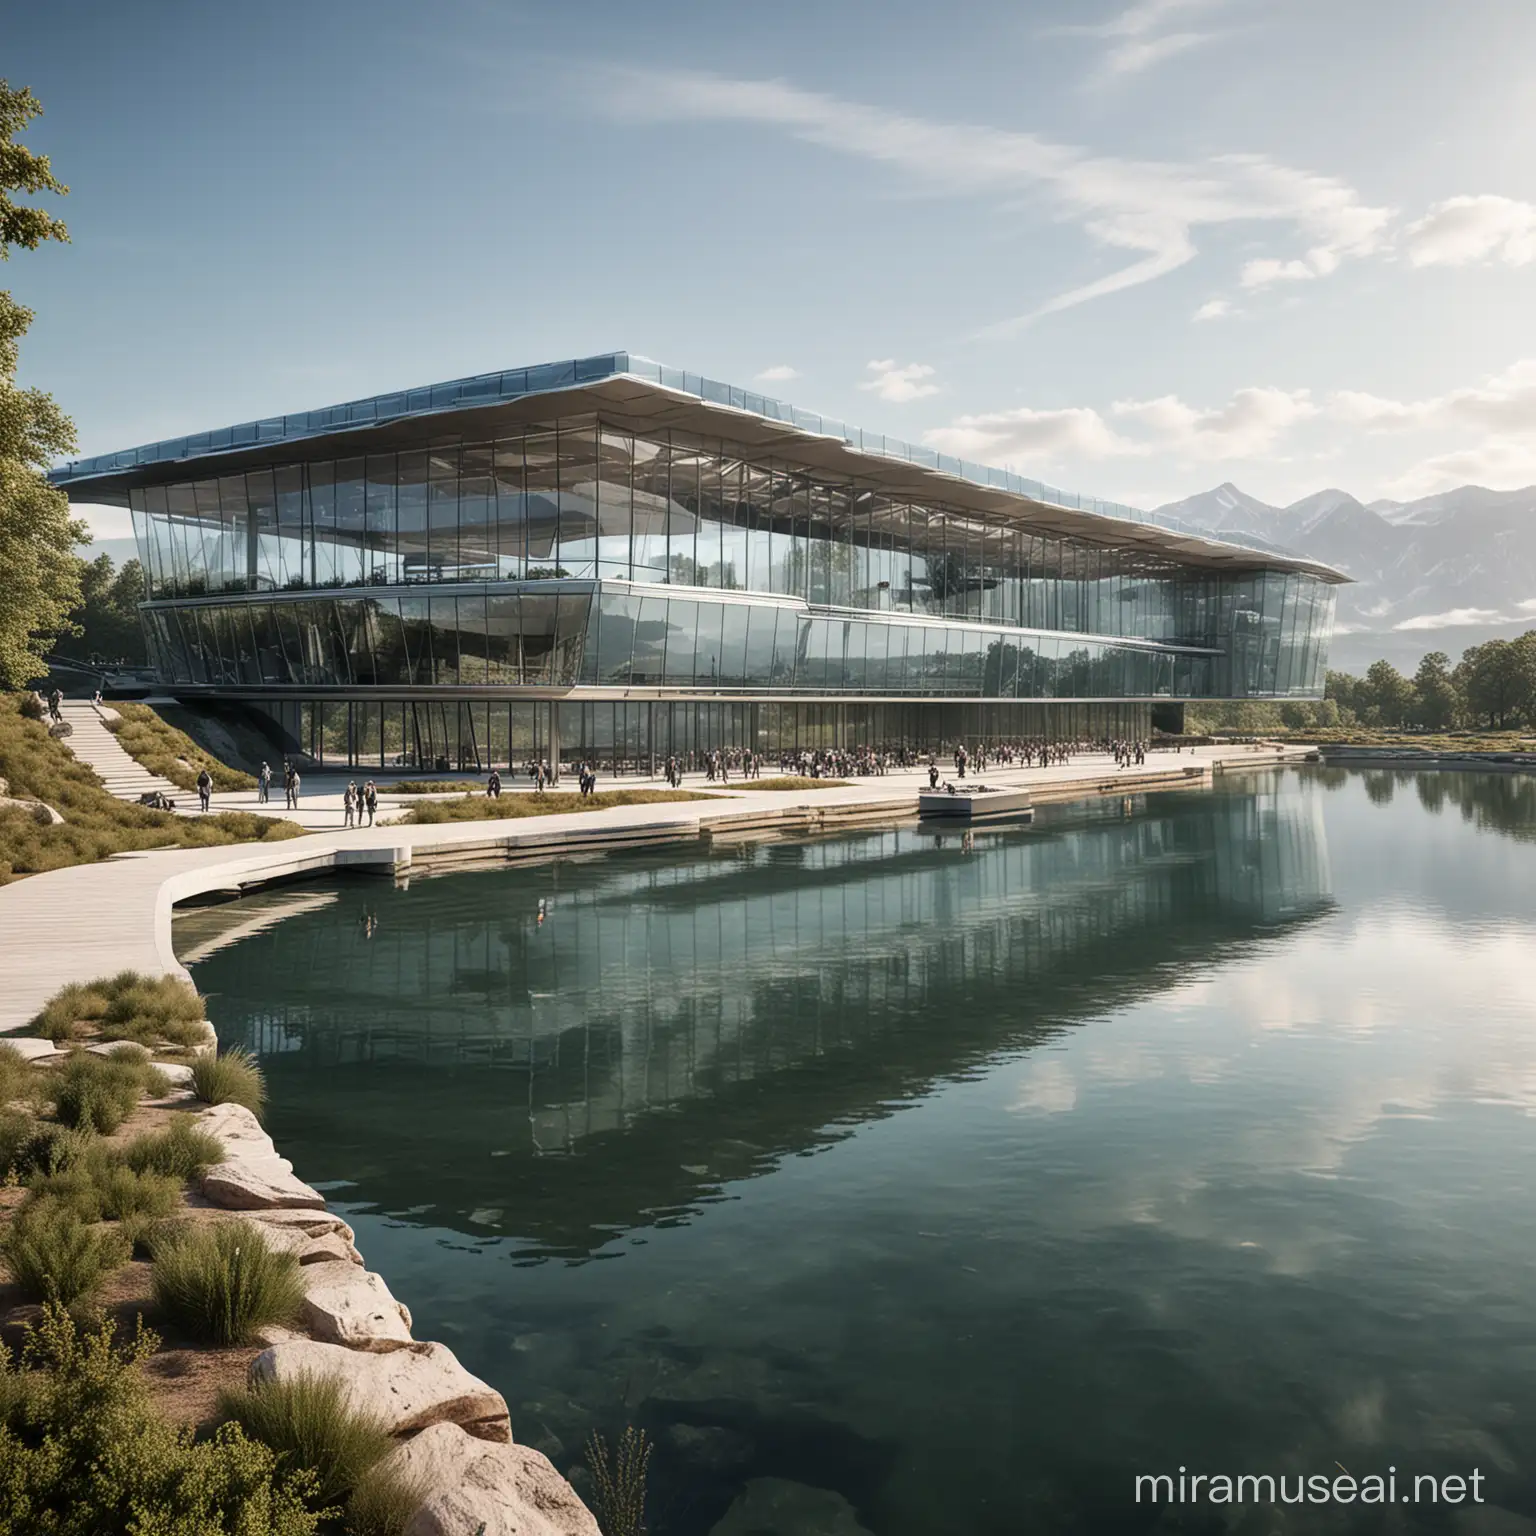 a complete futuristic superstructure  linking four conference building designs with glass walls with a lake view 
 